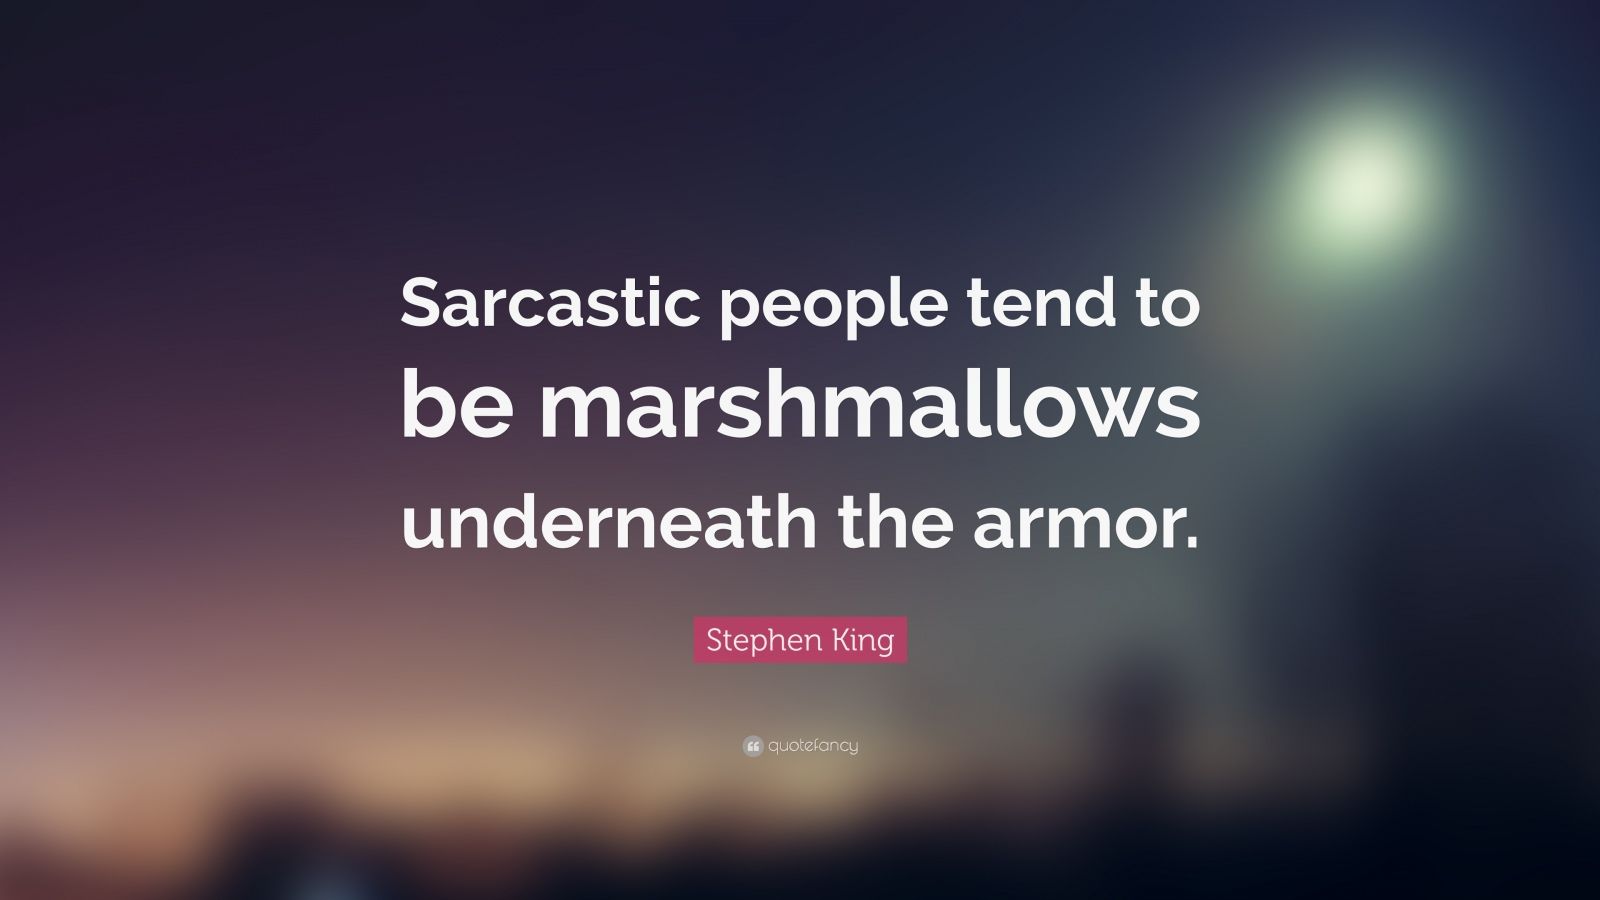 Stephen King Quote: “Sarcastic people tend to be marshmallows